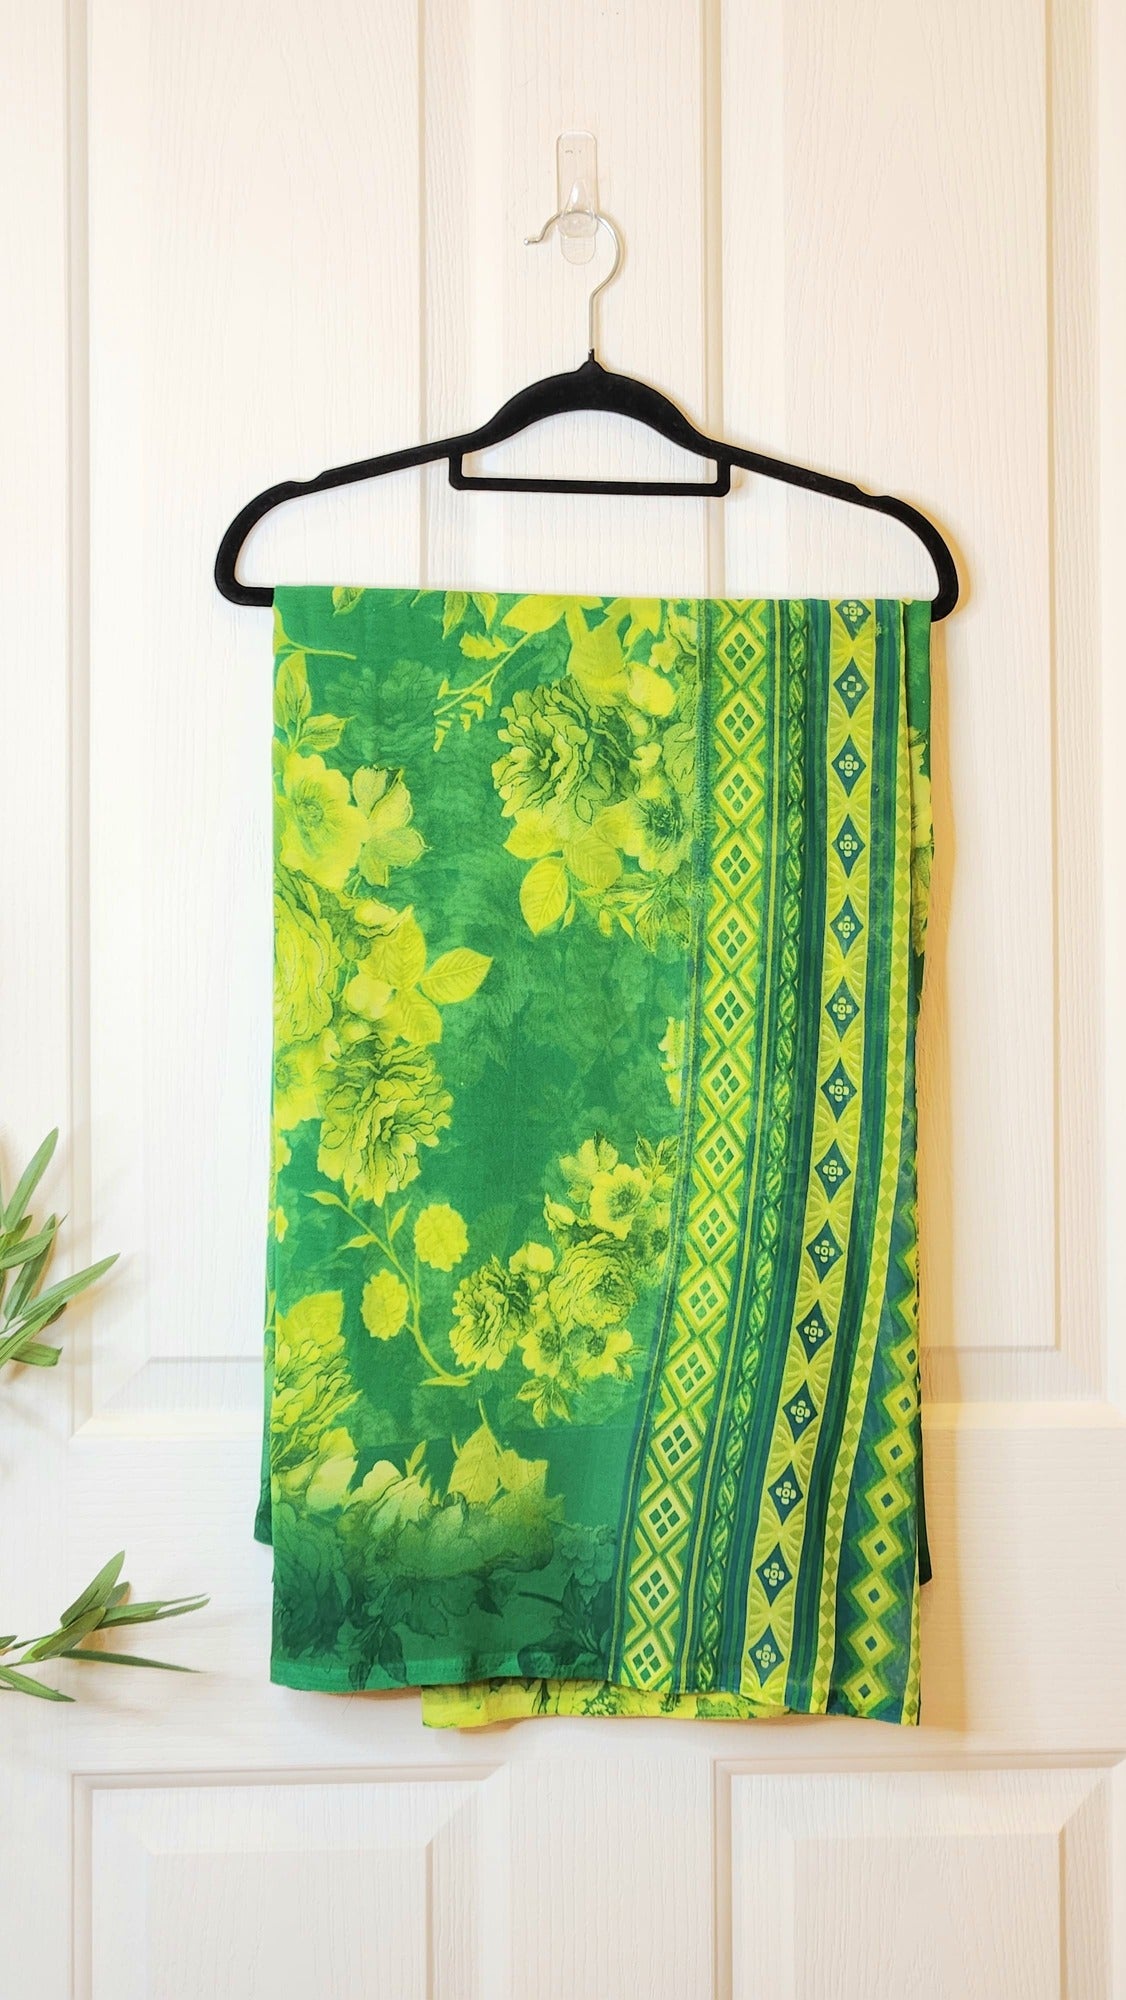 Chiffon Floral Saree in Bright Green with Mixed Color Palette Gemma